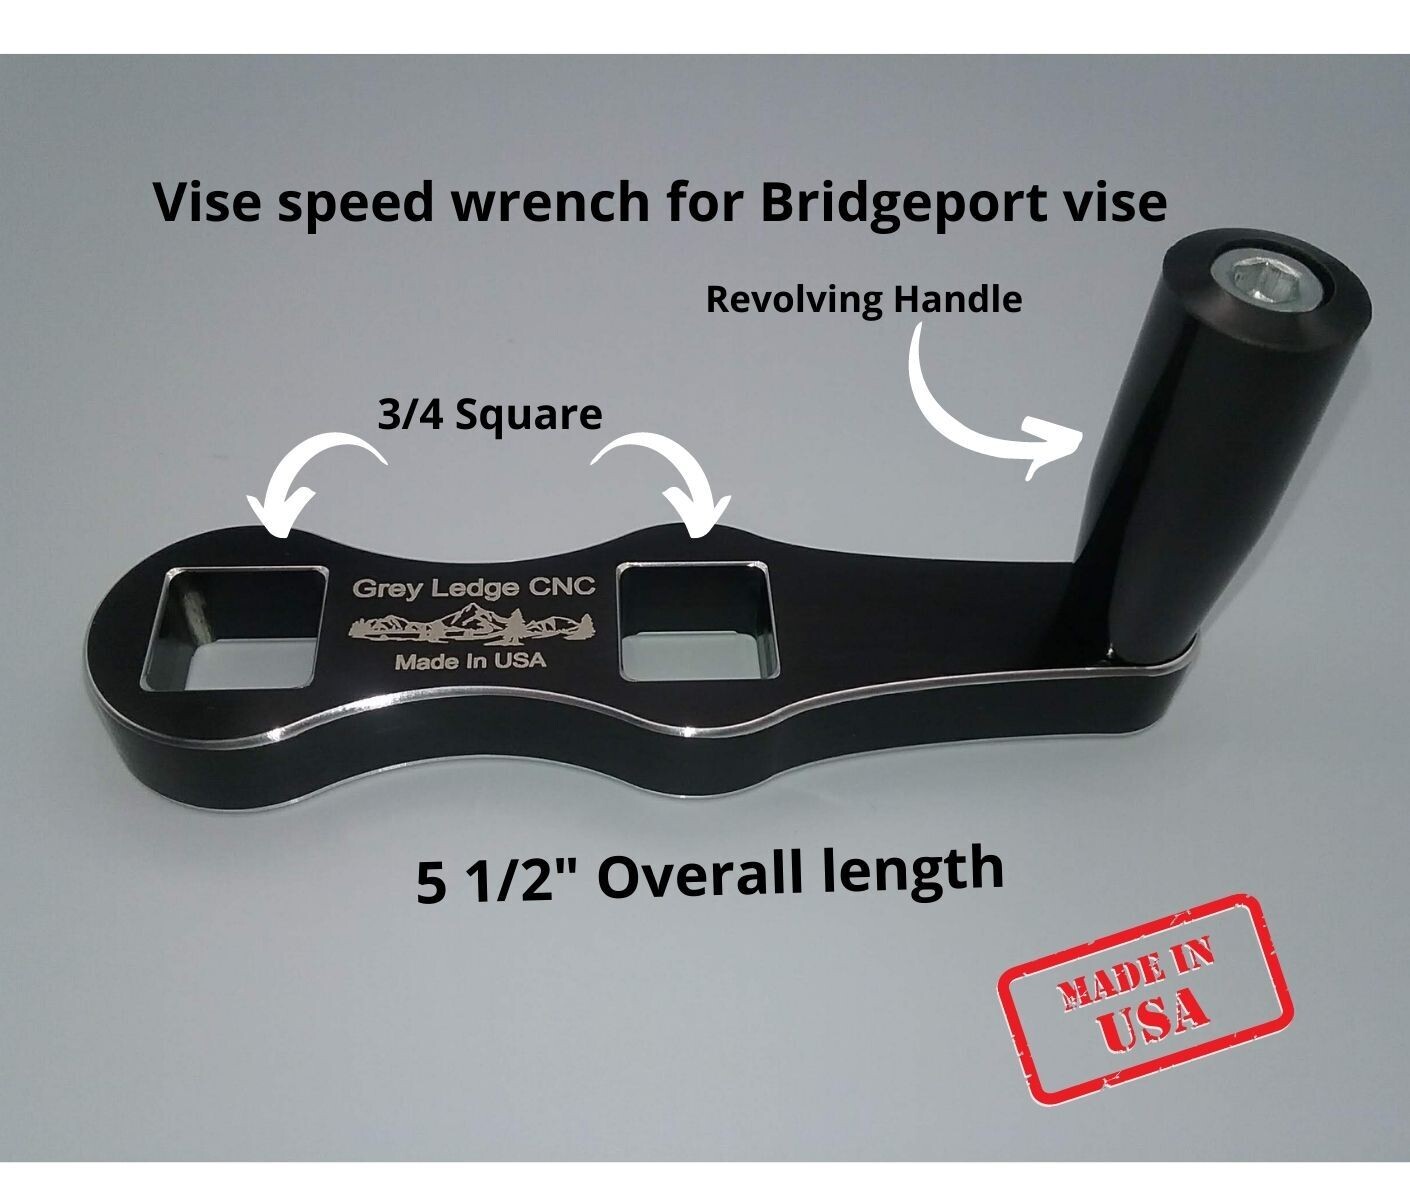 Speed vise handle for Bridgeport mill vises that have a 3/4 square